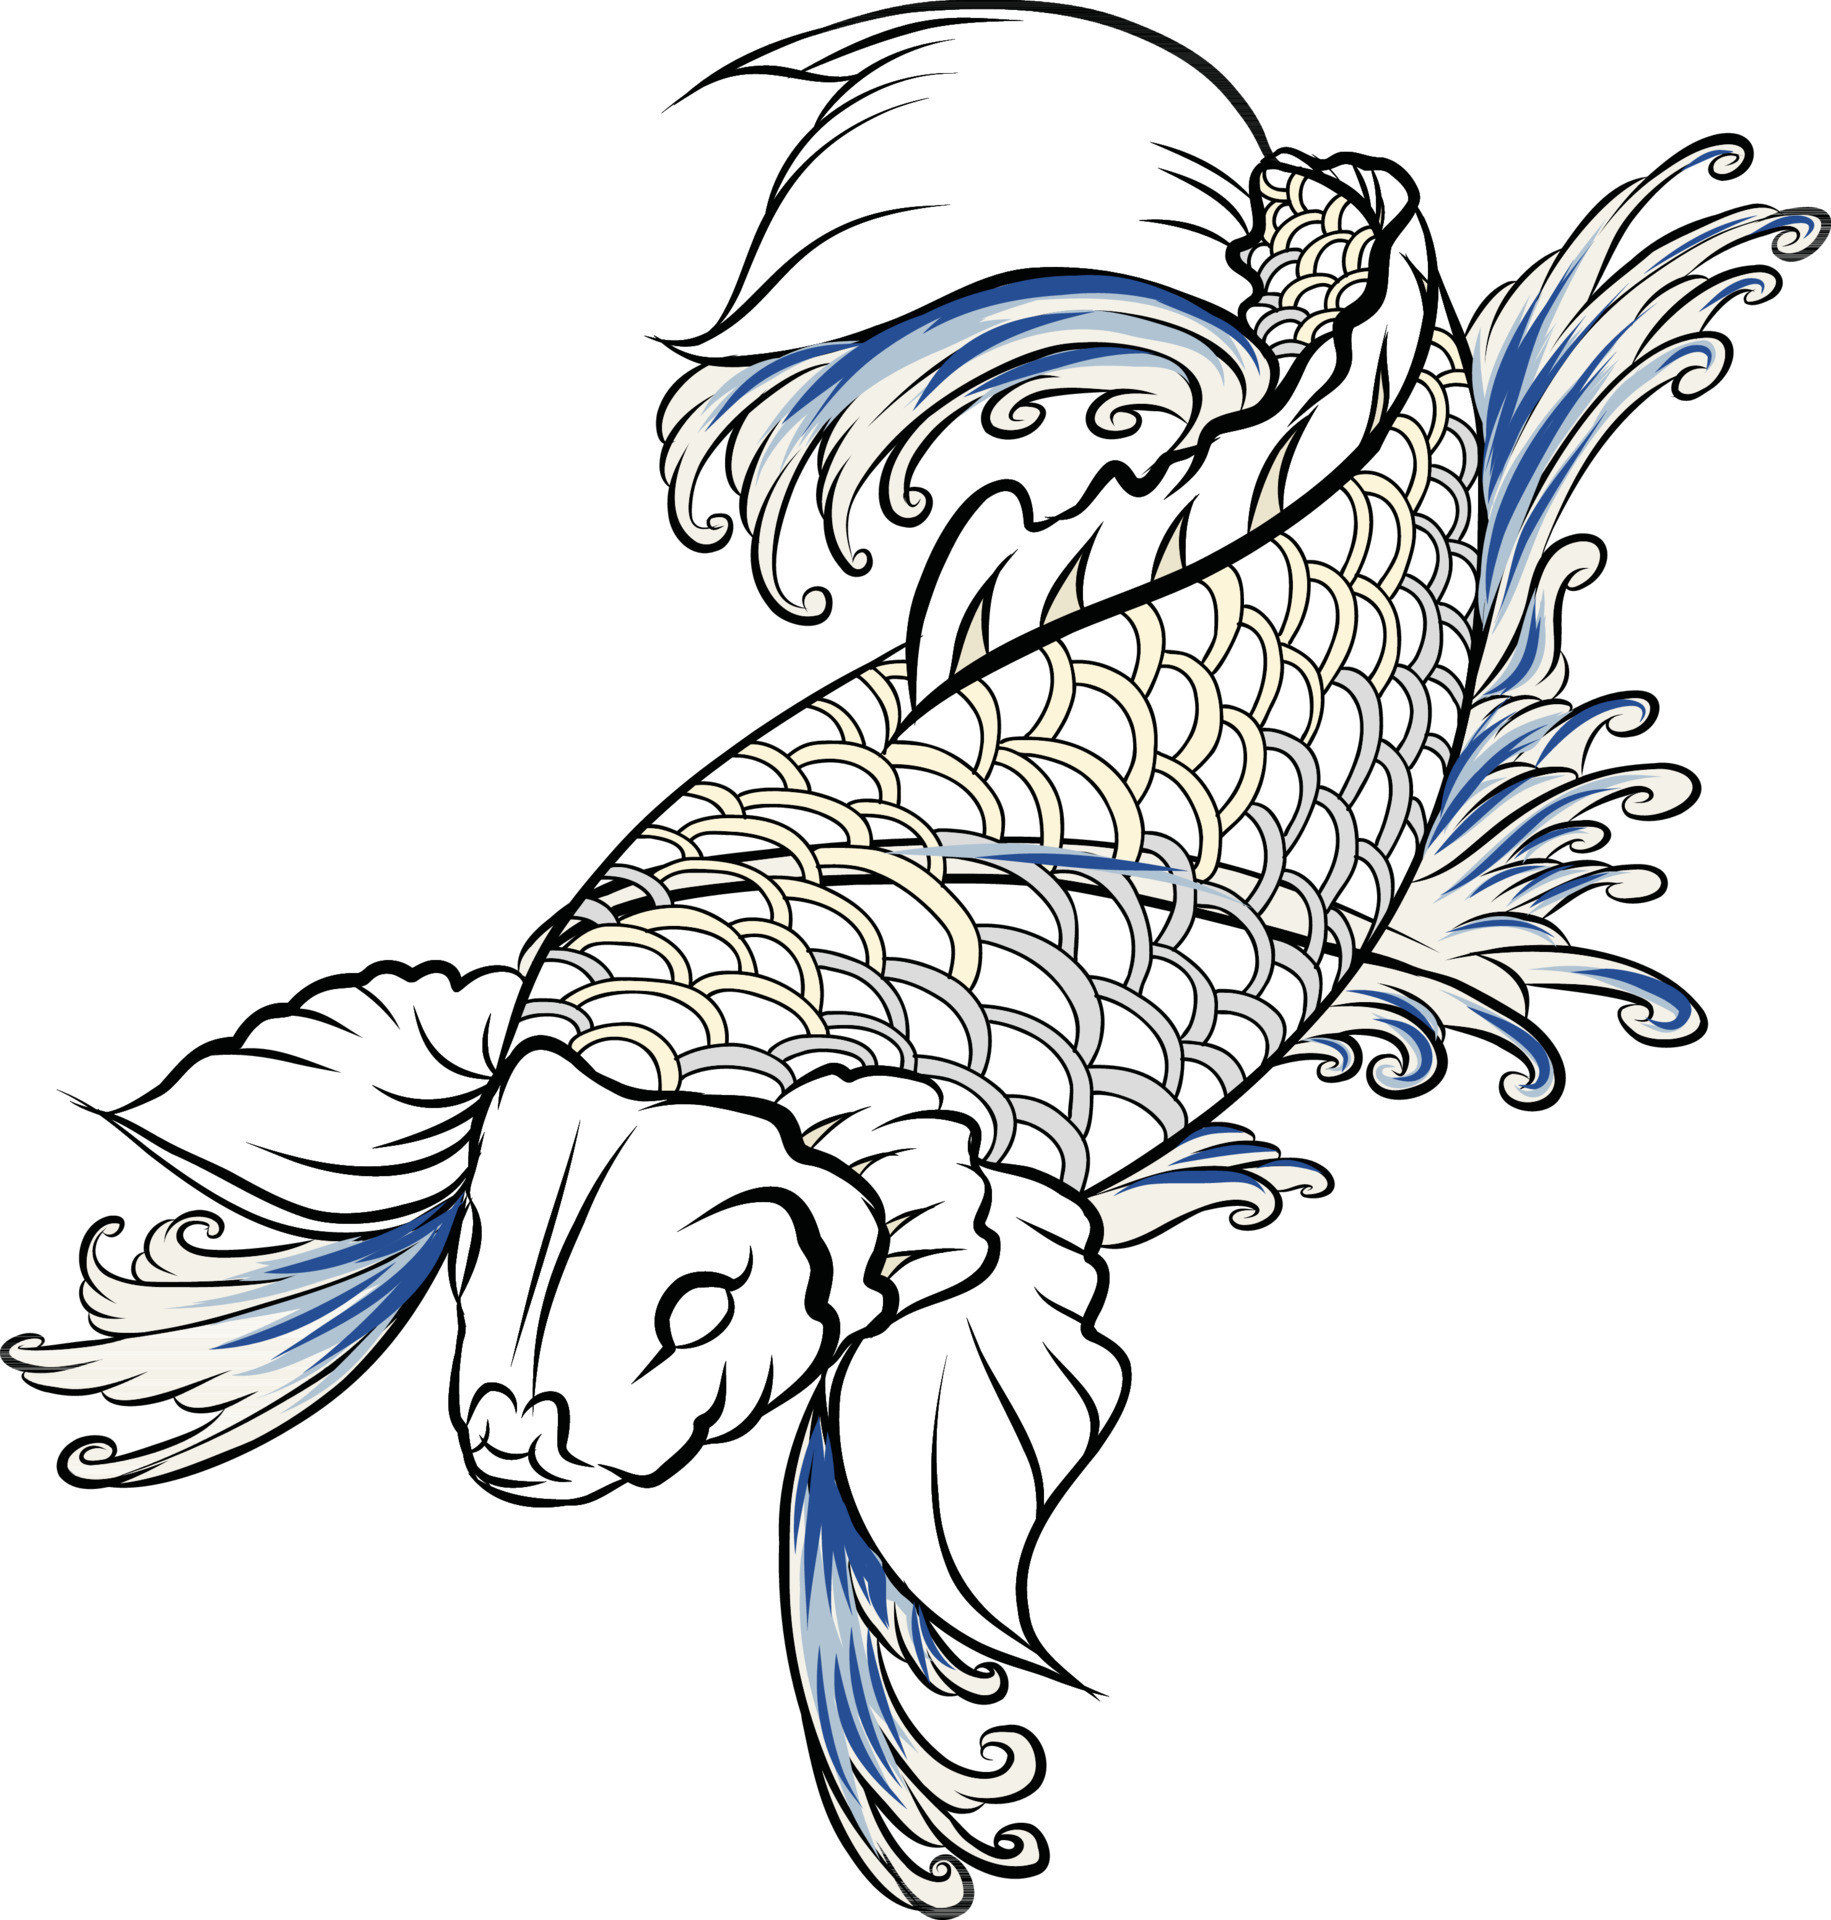 Hand Drawn Outline Koi Fish Tattoo Stock Vector Royalty Free 578204875   Shutterstock